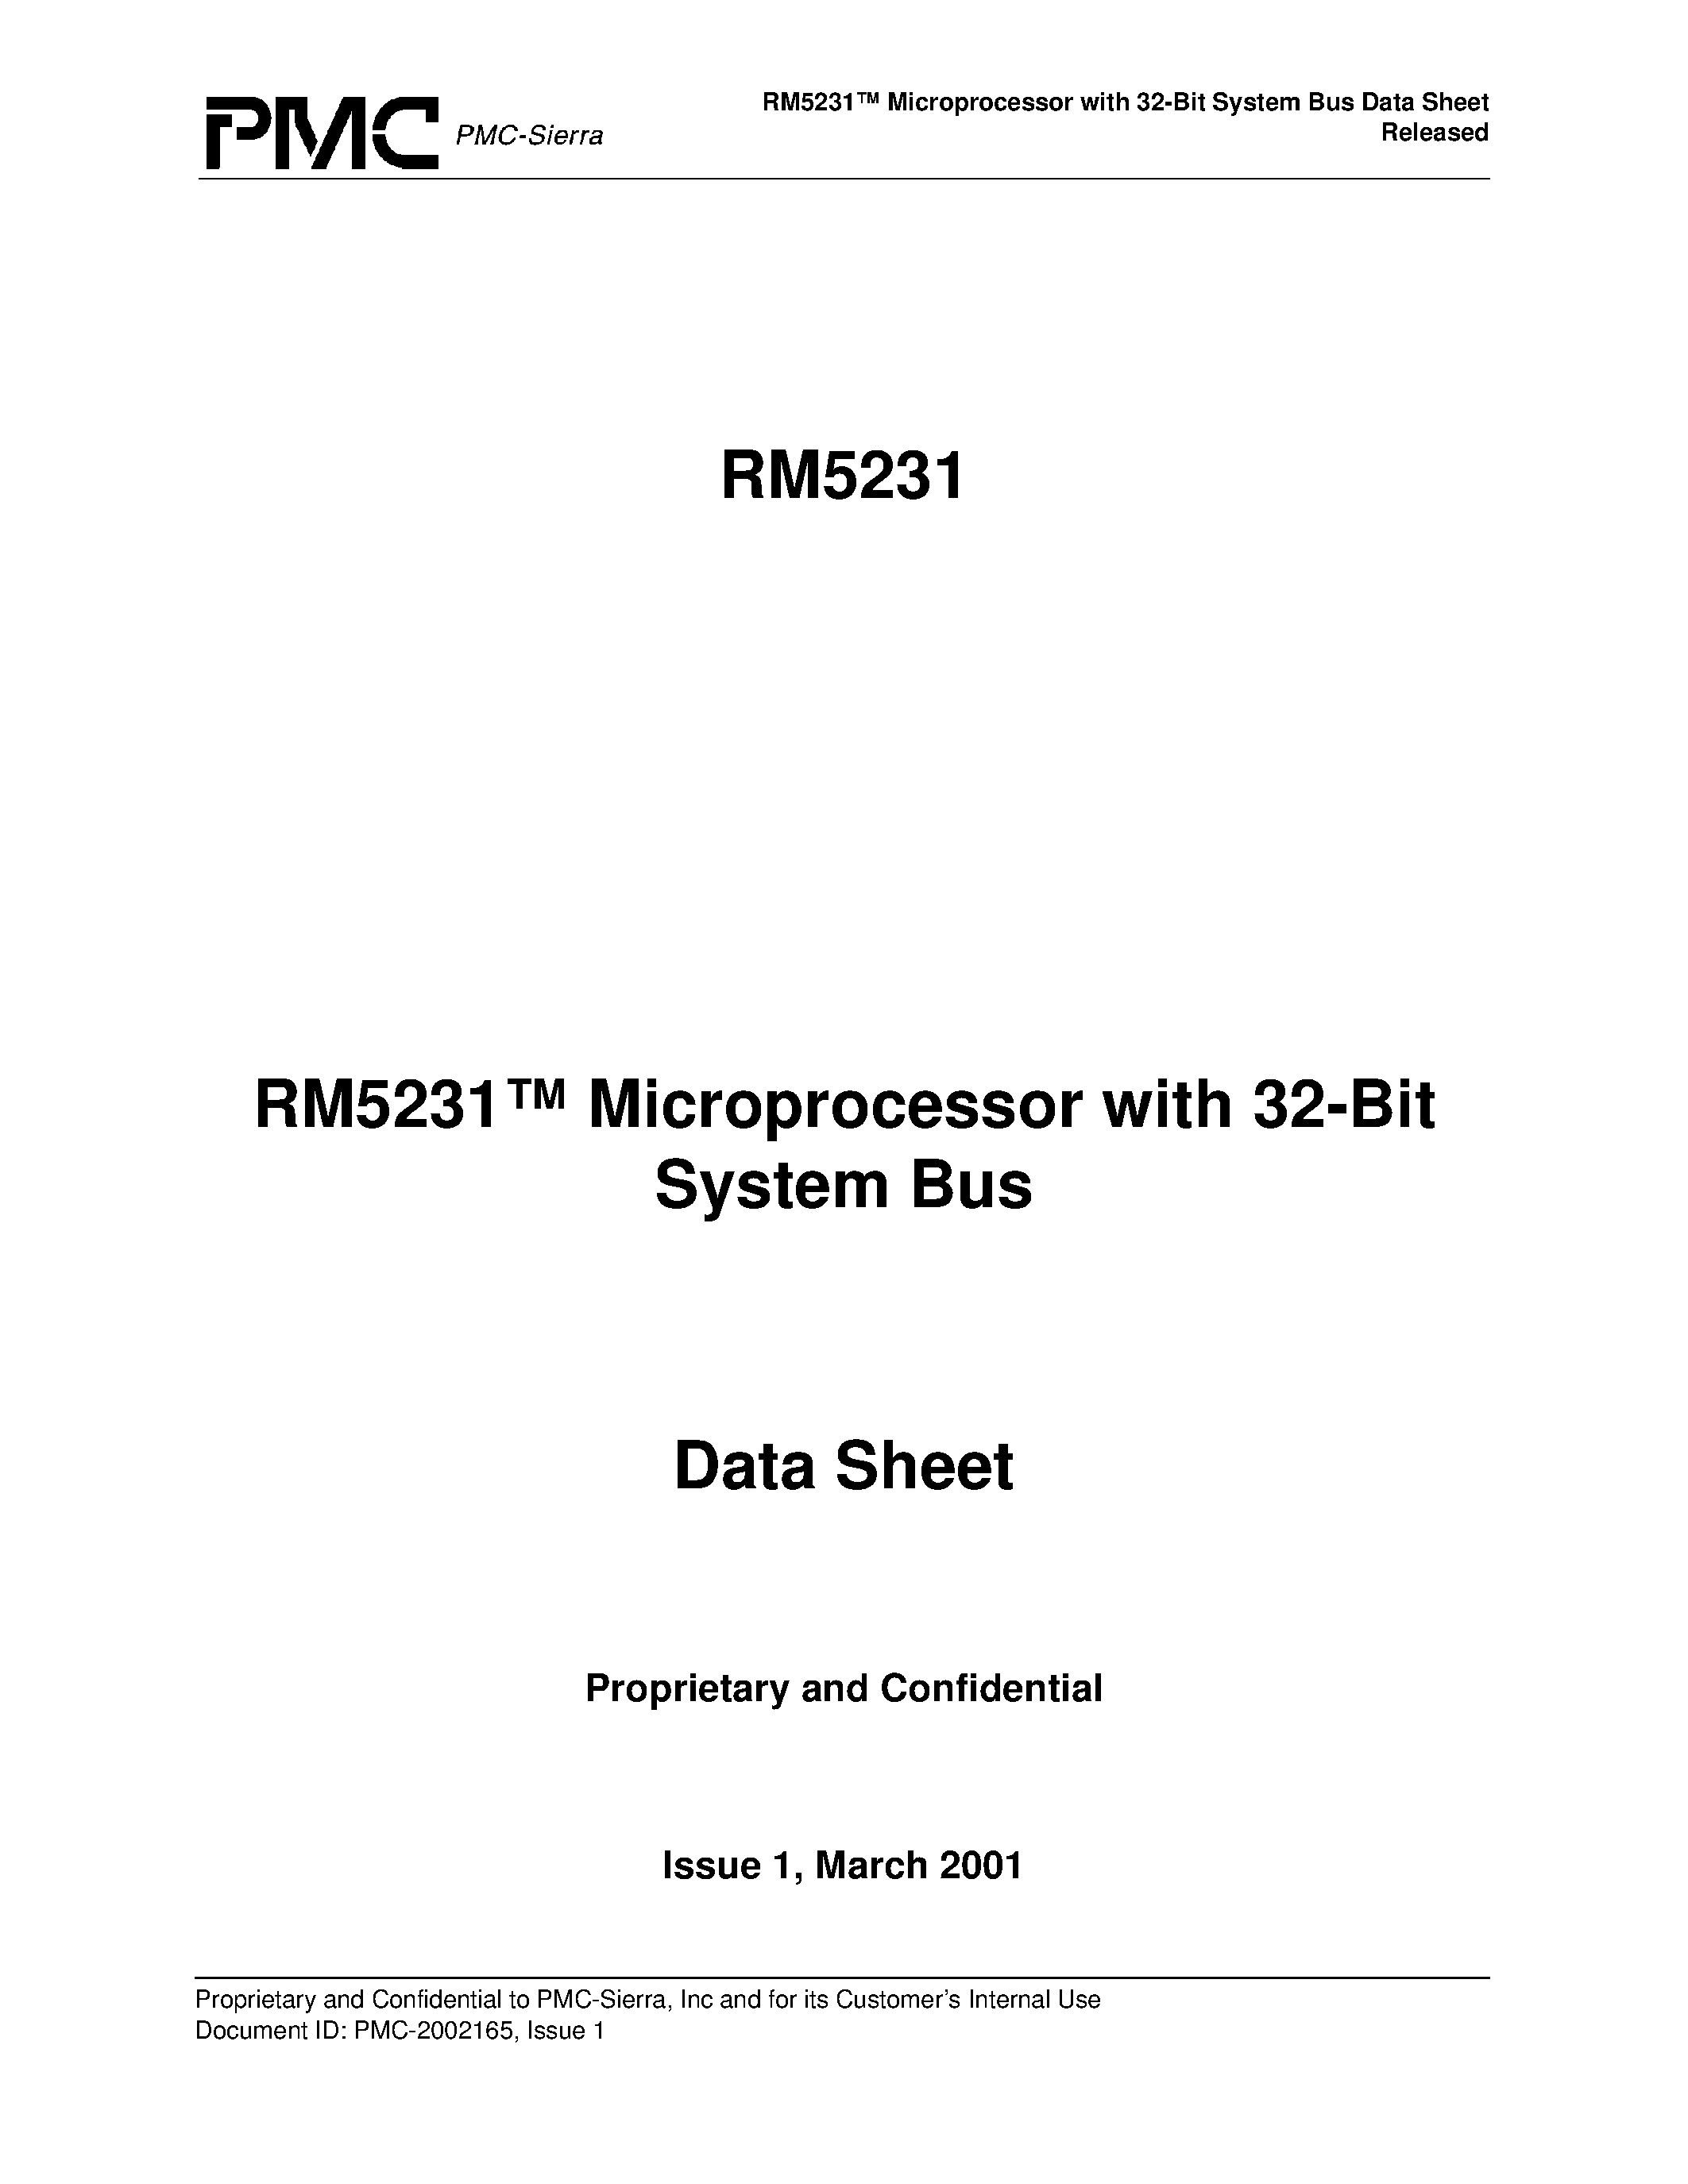 Datasheet RM5231-150-Q - RM5231 Microprocessor with 32-Bit System Bus Data Sheet Released page 1